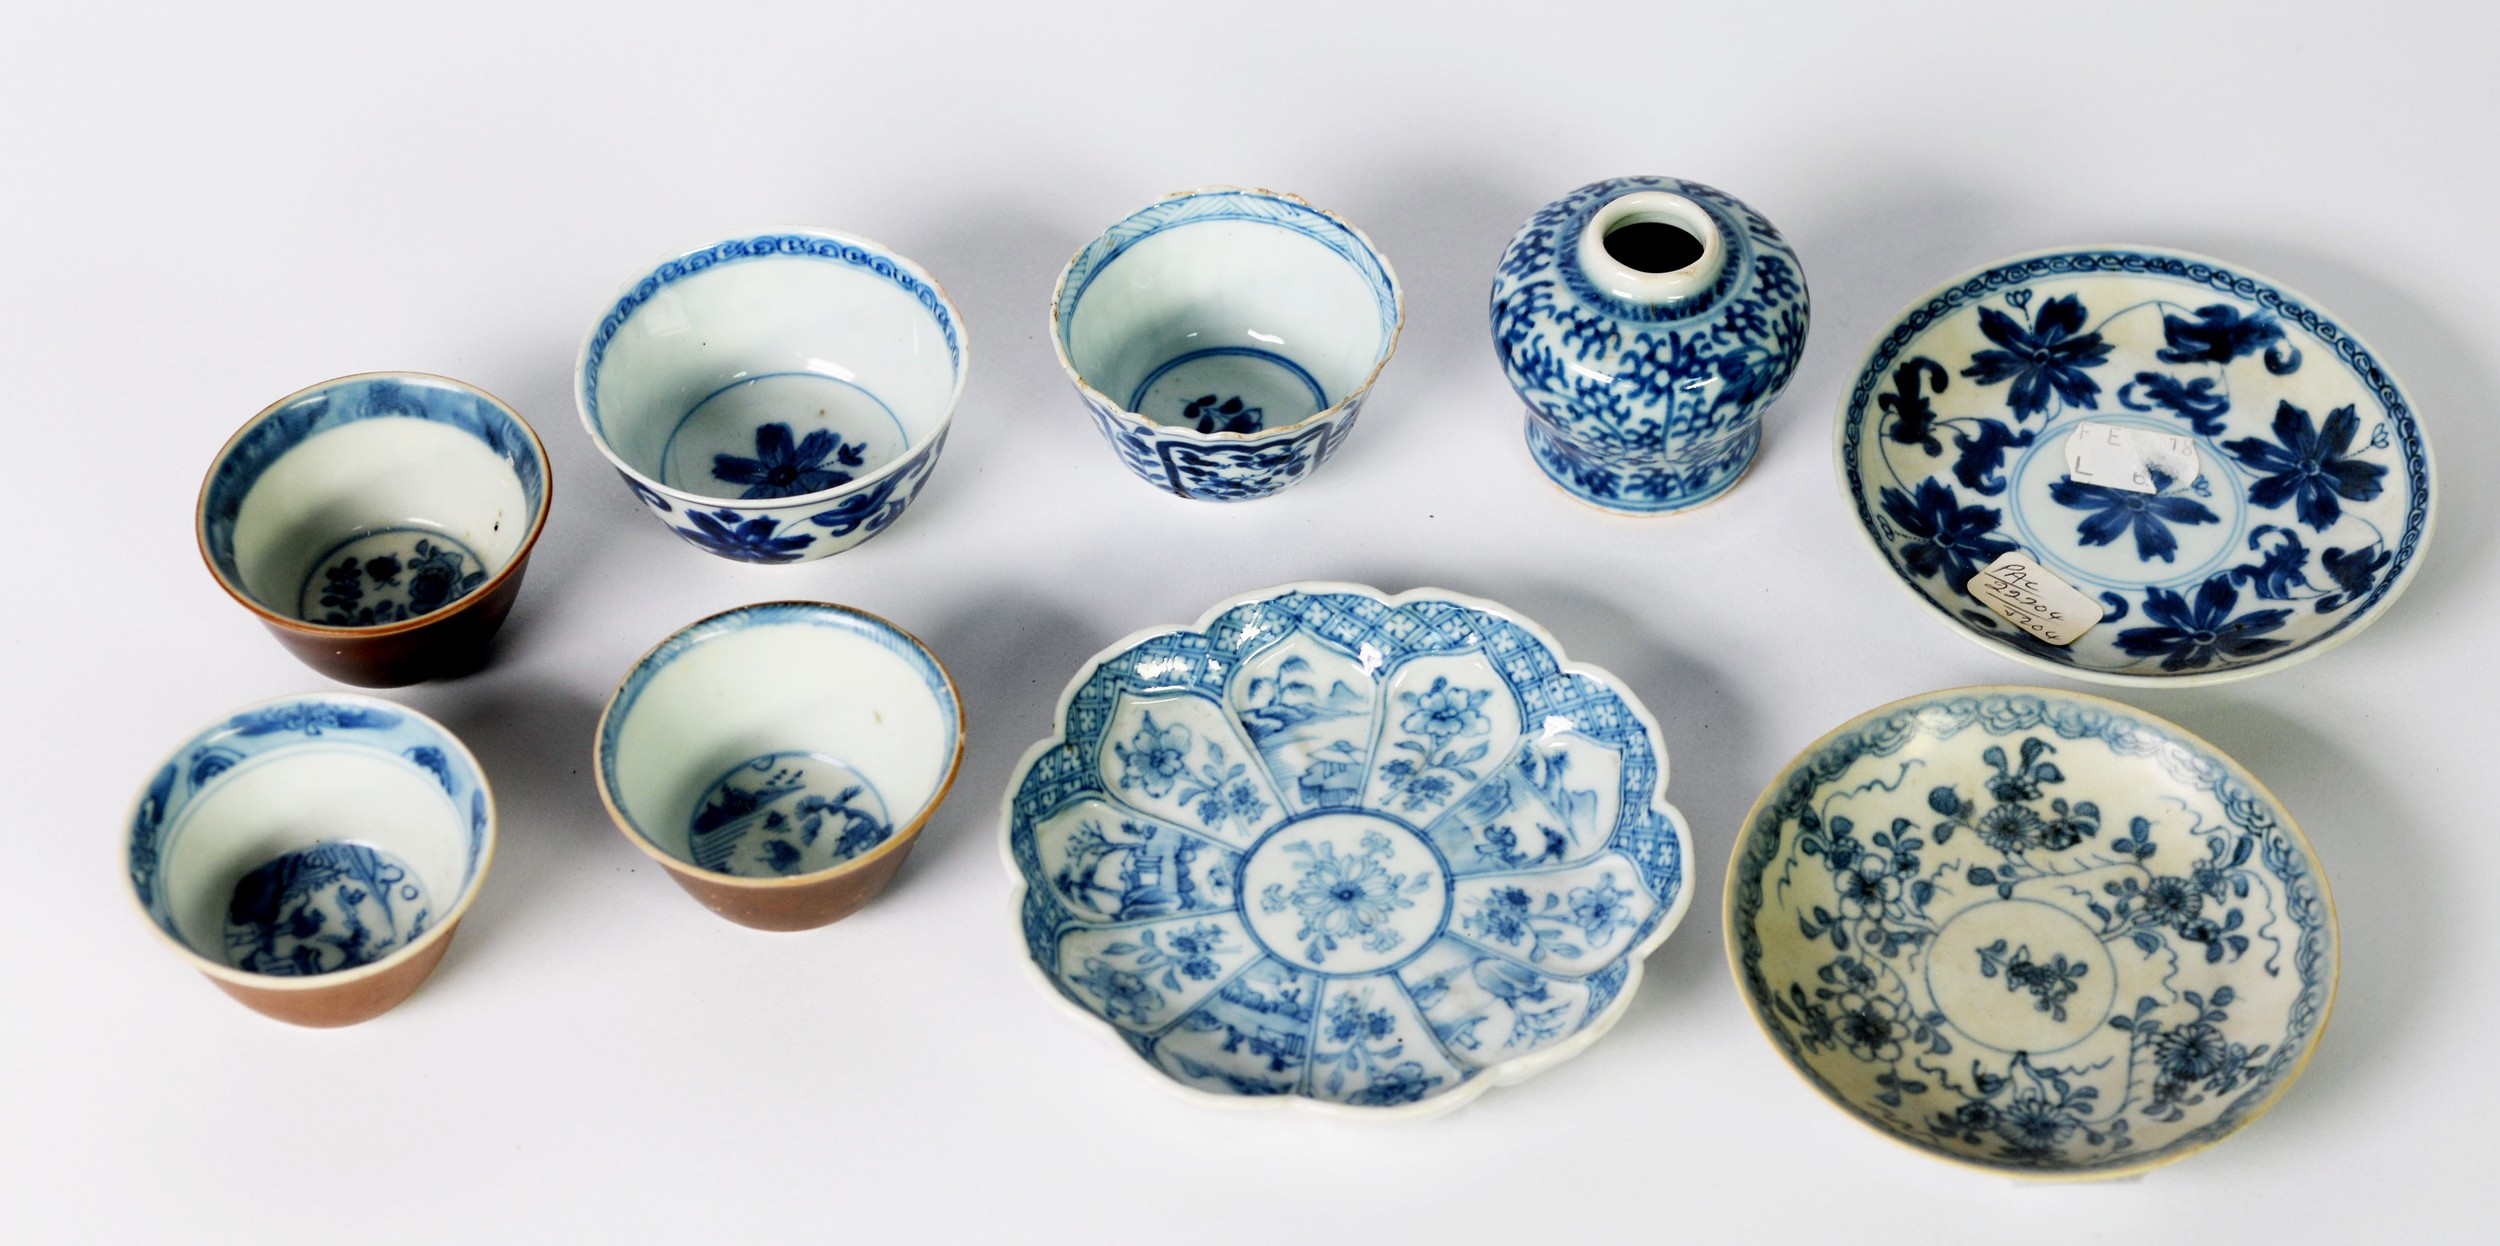 COLLECTION OF EARLY 18TH CENTURY AND LATER BLUE & WHITE CHINESE PORCELAIN TEA WARES, including three